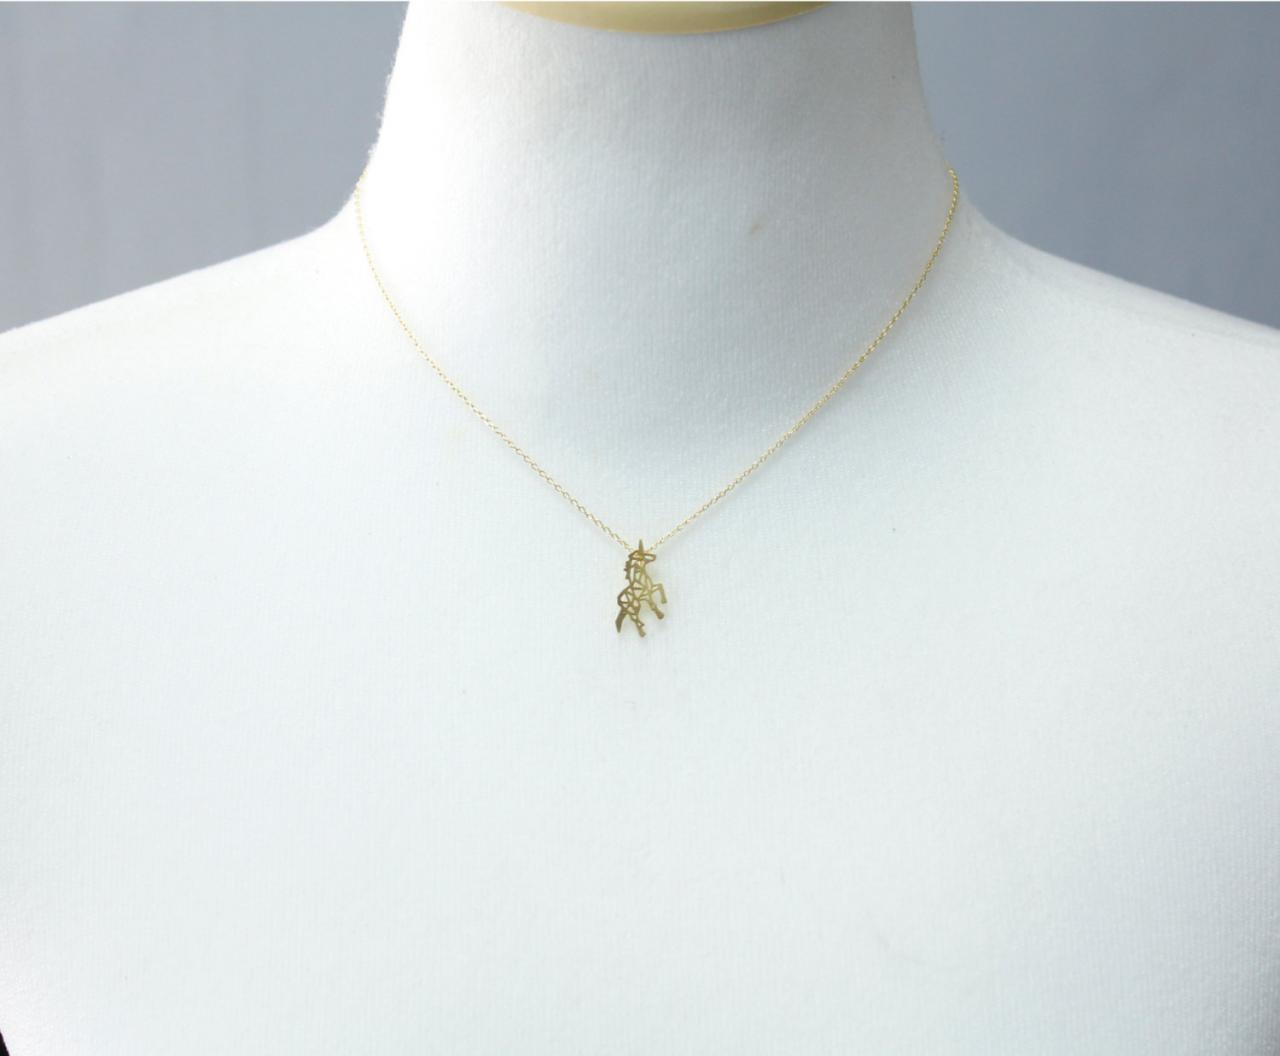 Beautiful Unicorn Necklace In Silver/ Gold, N0256g on Luulla